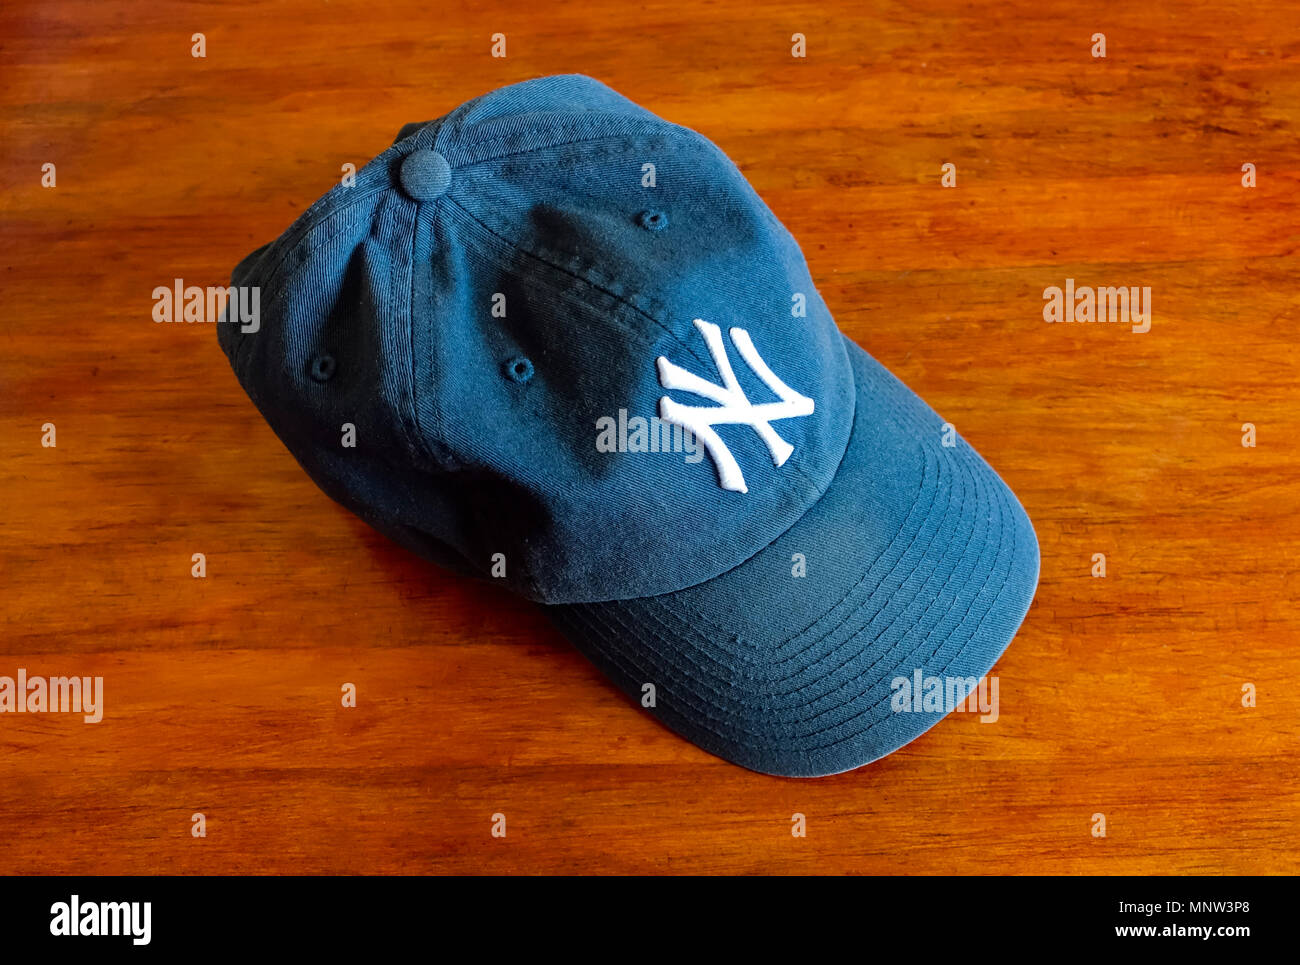 A New York Yankees baseball cap on a wooden table Stock Photo